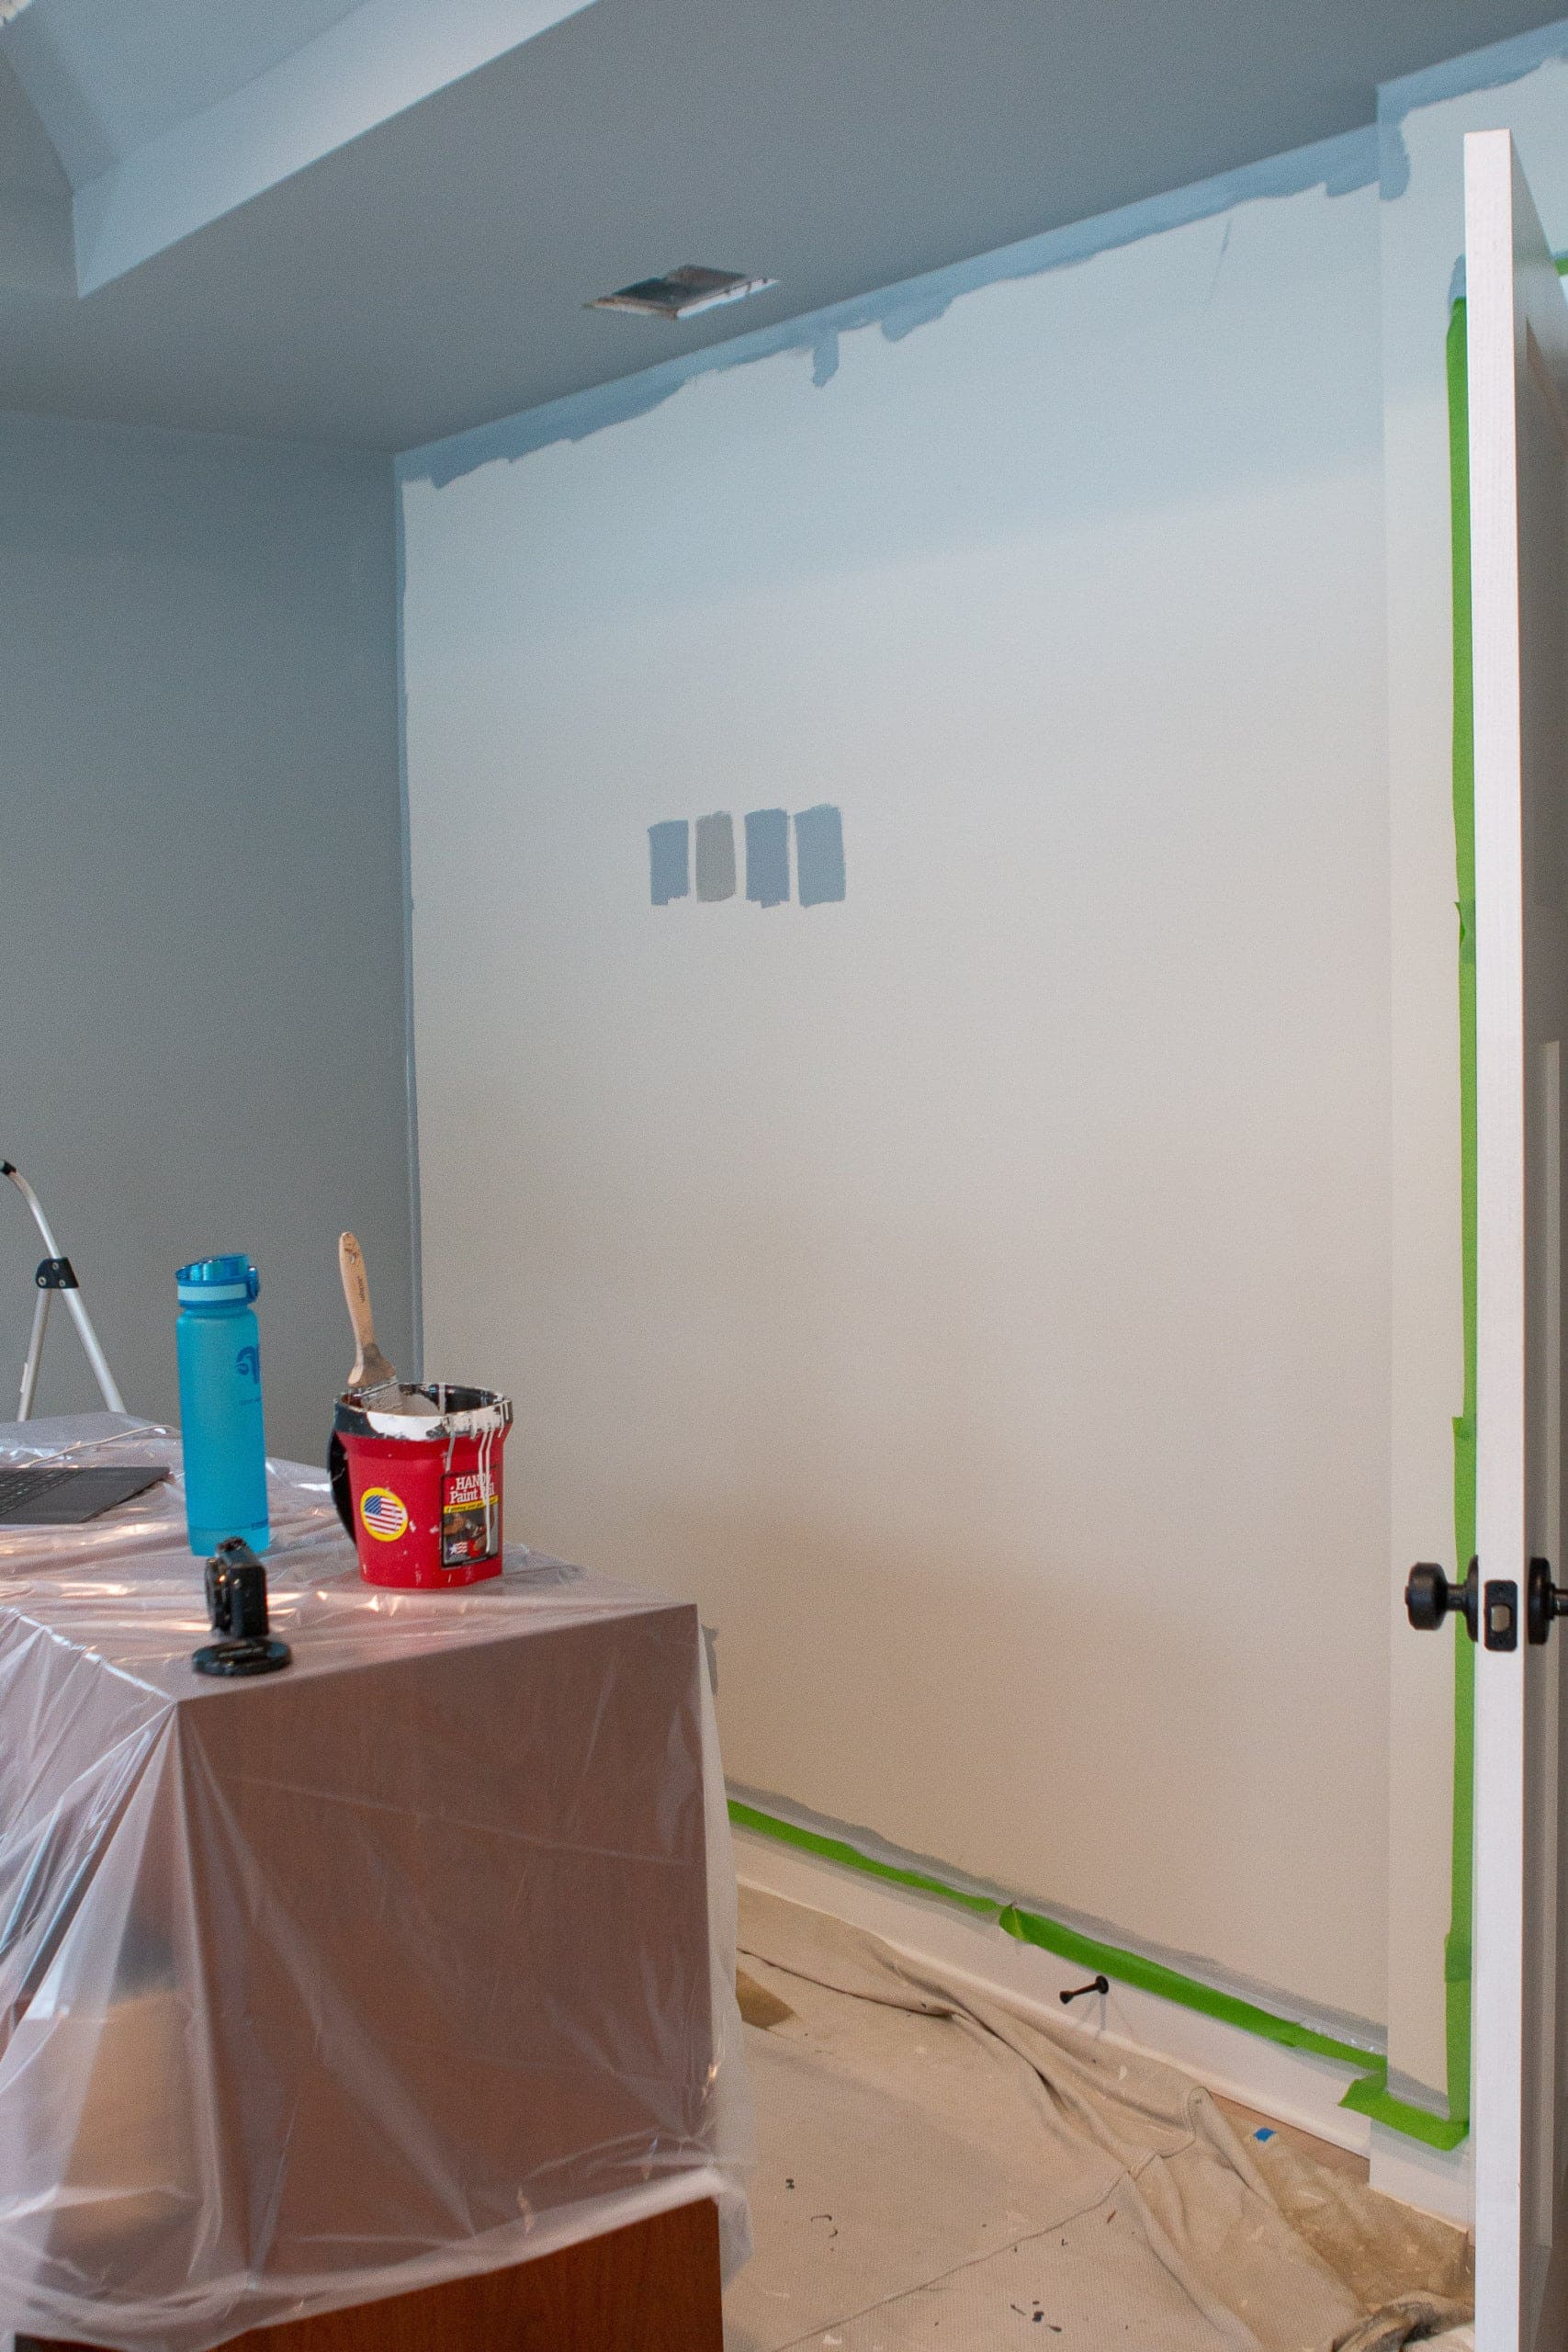 painting the walls in our bedroom a blue gray paint color - Benjamin Moore "Boothbay Gray"